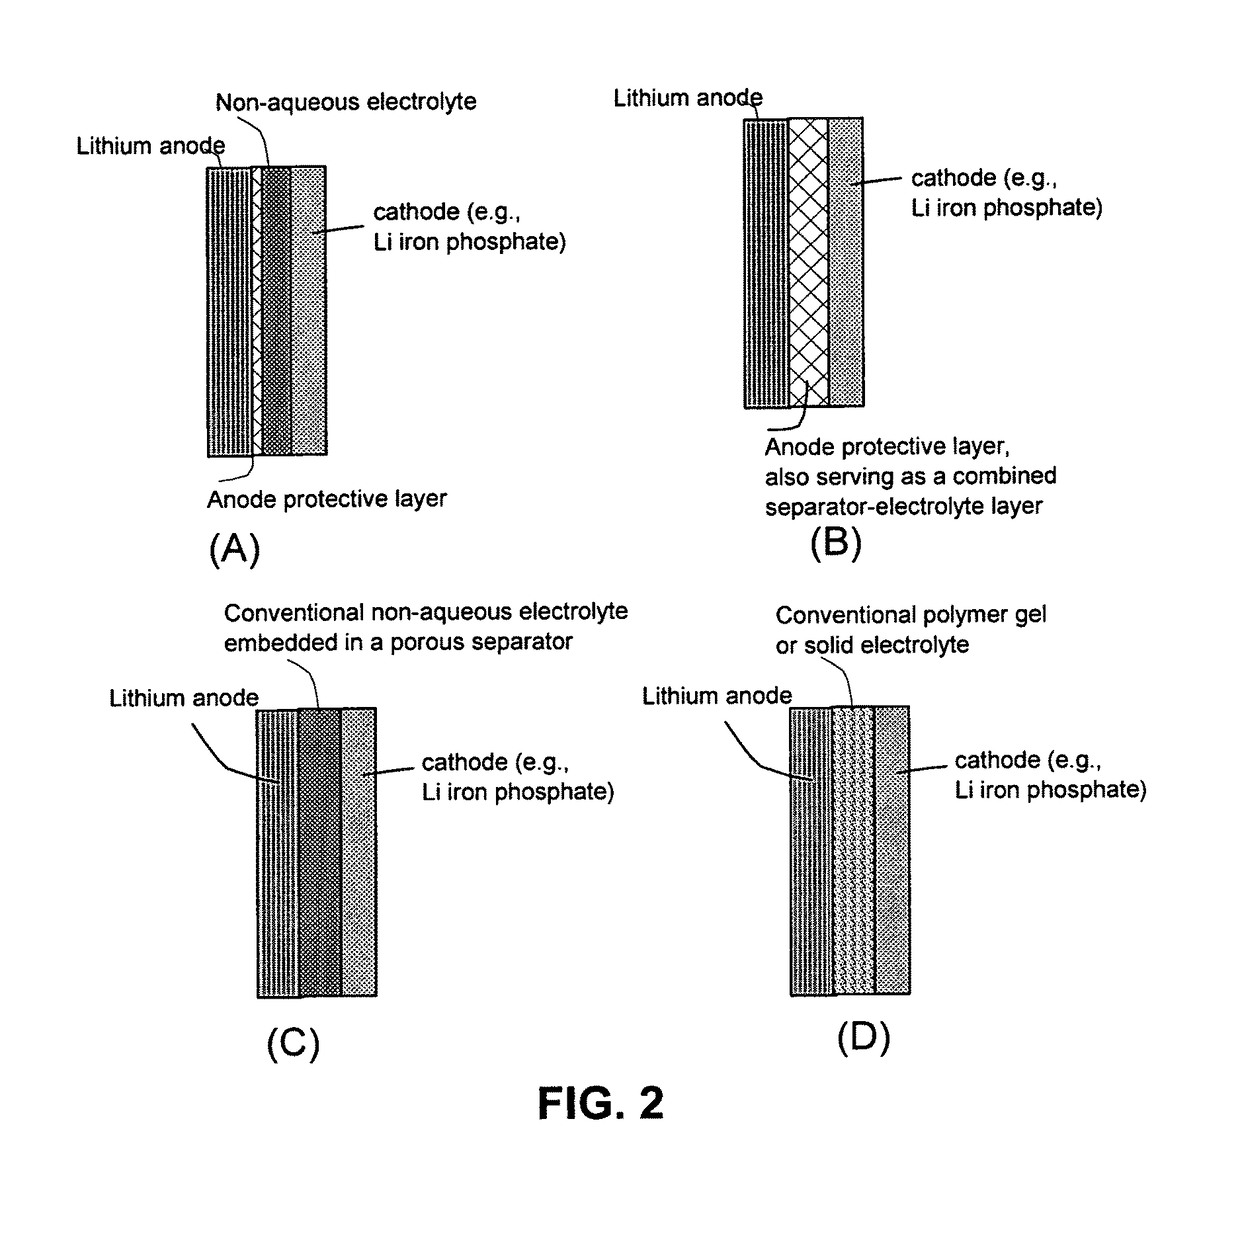 Anode protective layer compositions for lithium metal batteries